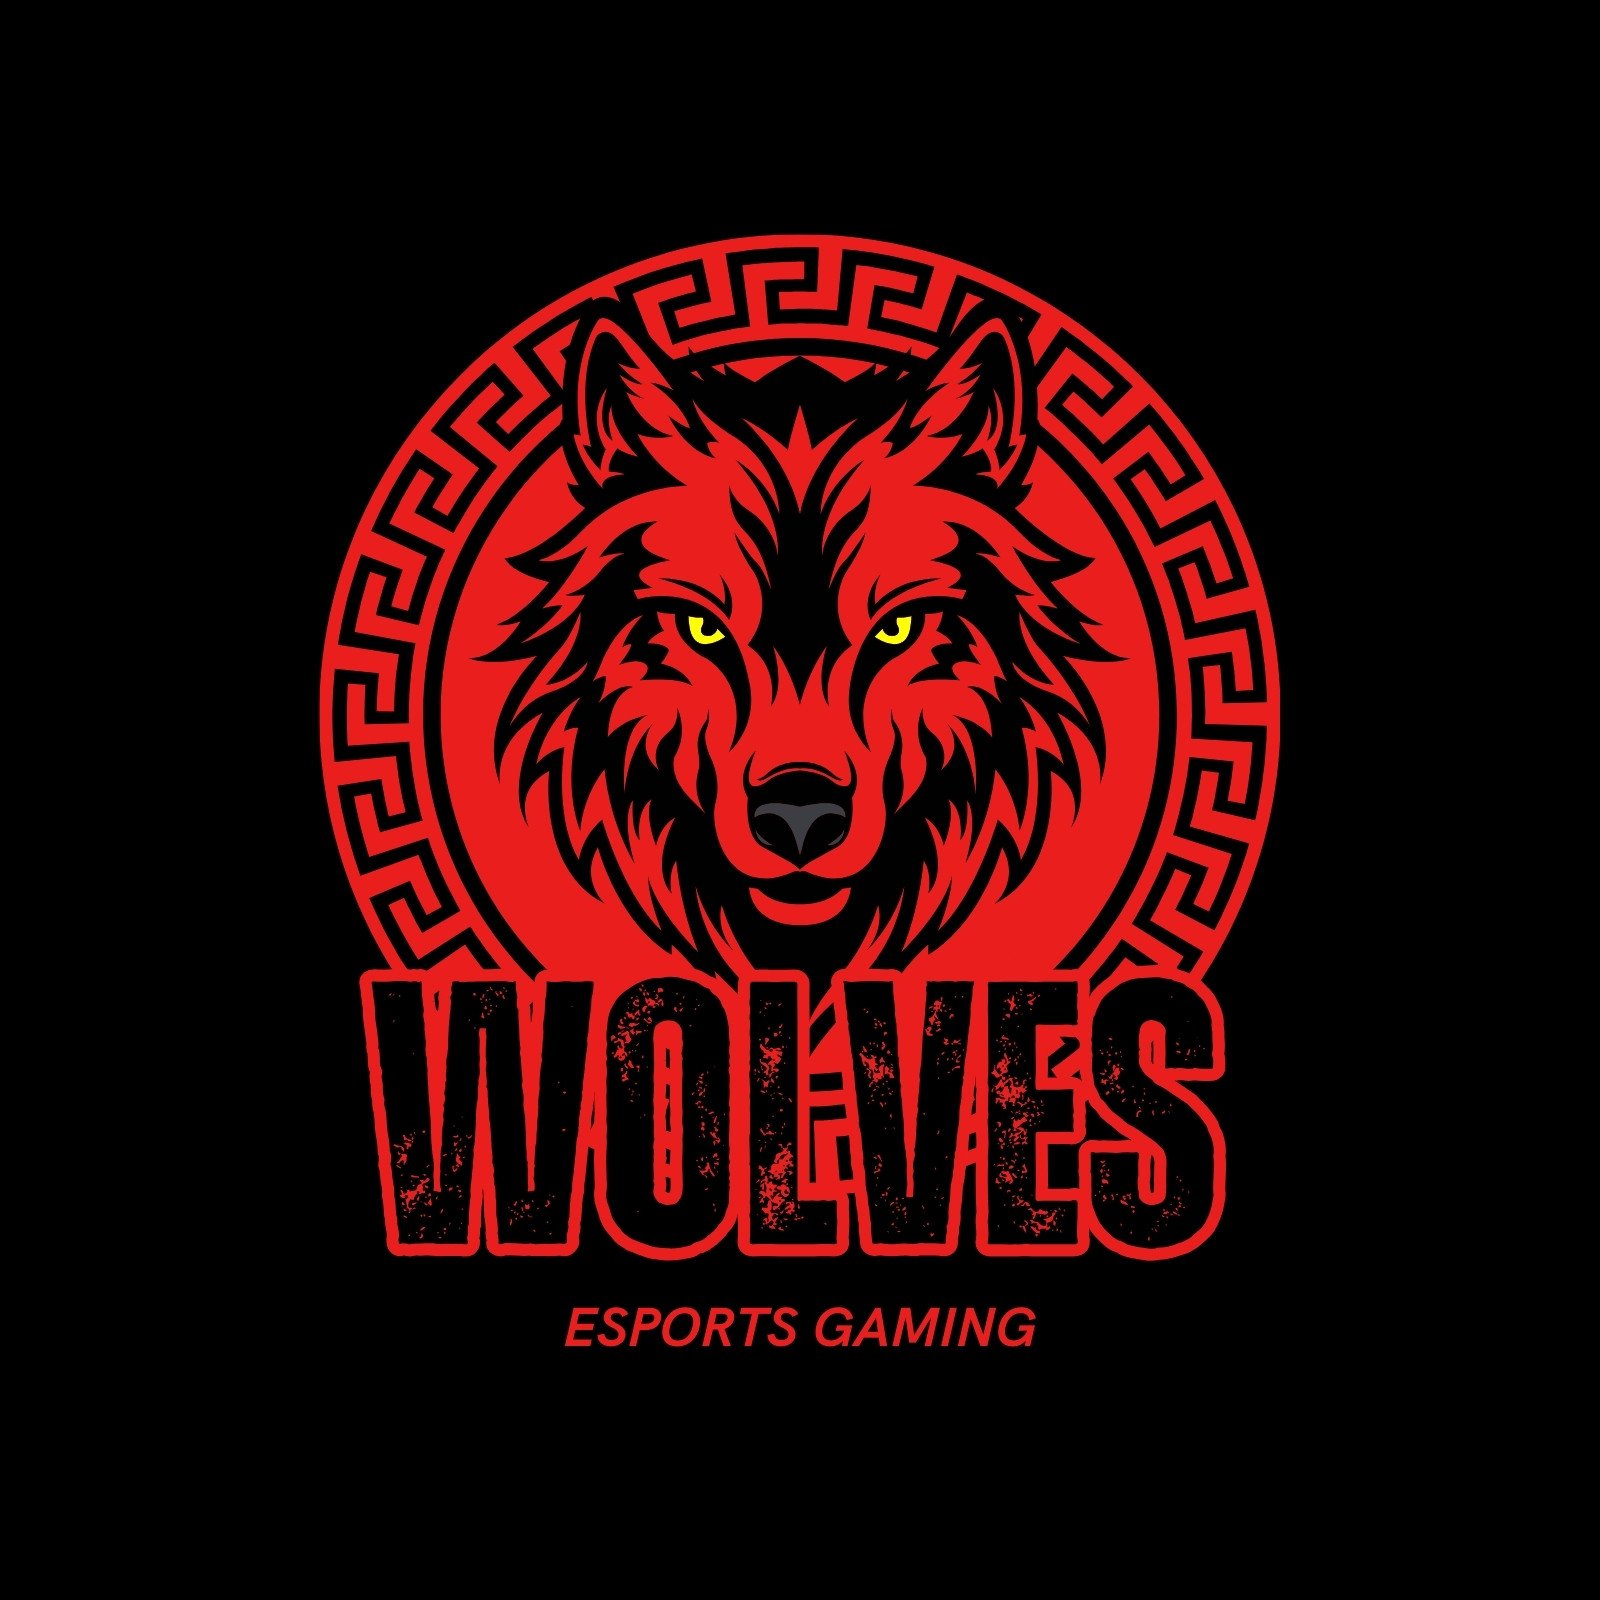 Red and Black Illustrative Wolf Gaming Logo